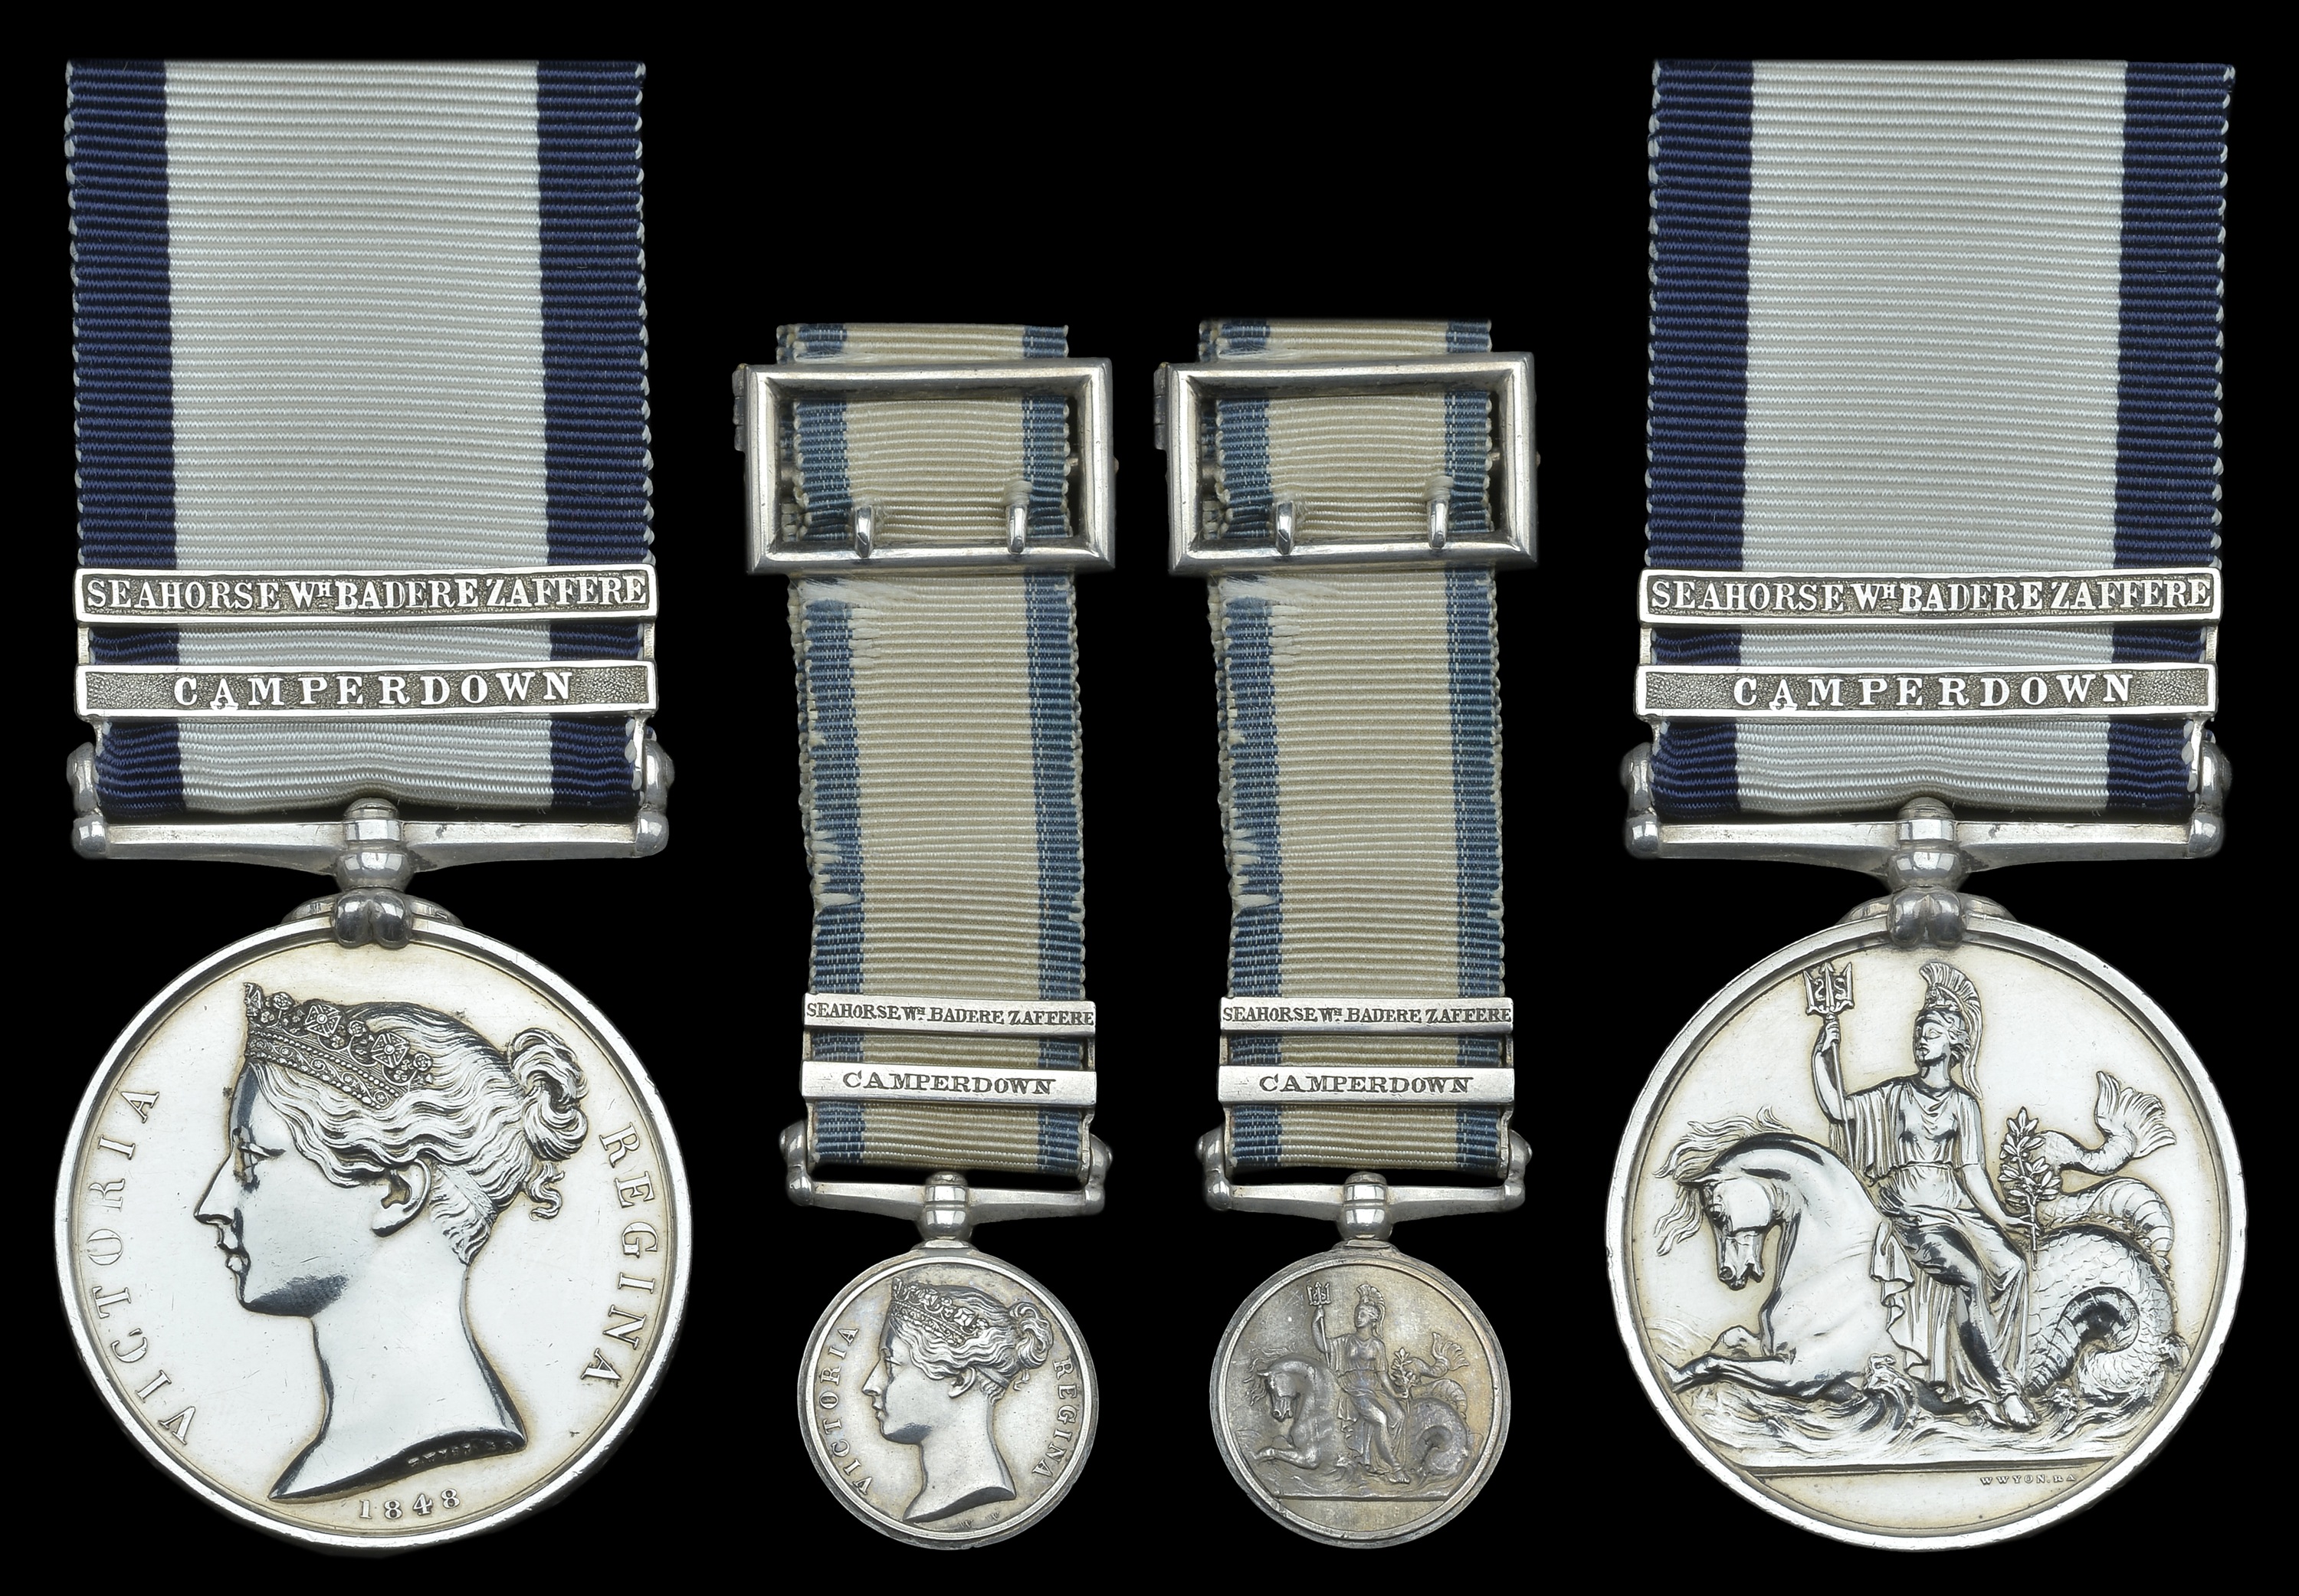 The outstanding N.G.S. medal awarded to Admiral Thomas Bennett, R.N., who was wounded as a 1...